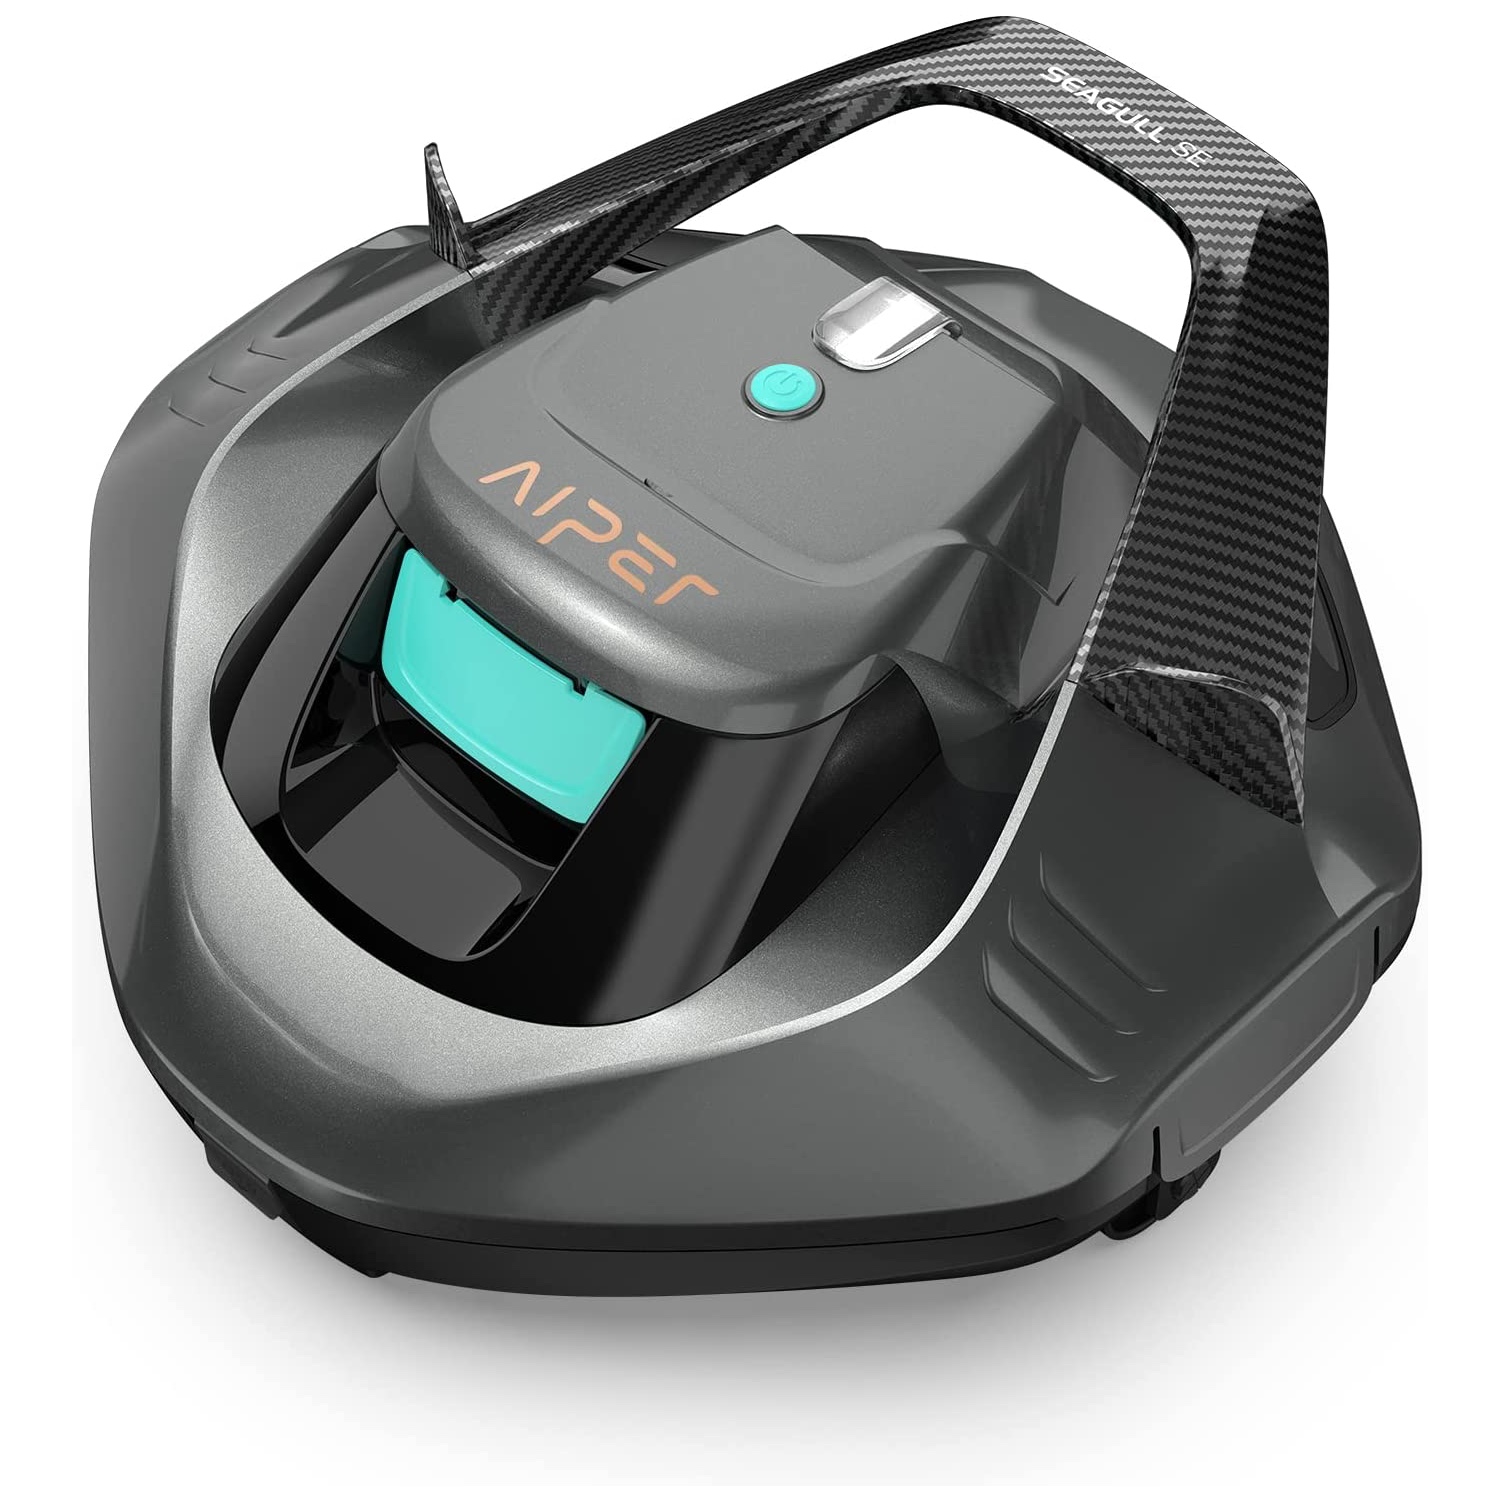 The Best Pool Vacuum Option: Aiper Seagull SE Cordless Robotic Pool Cleaner